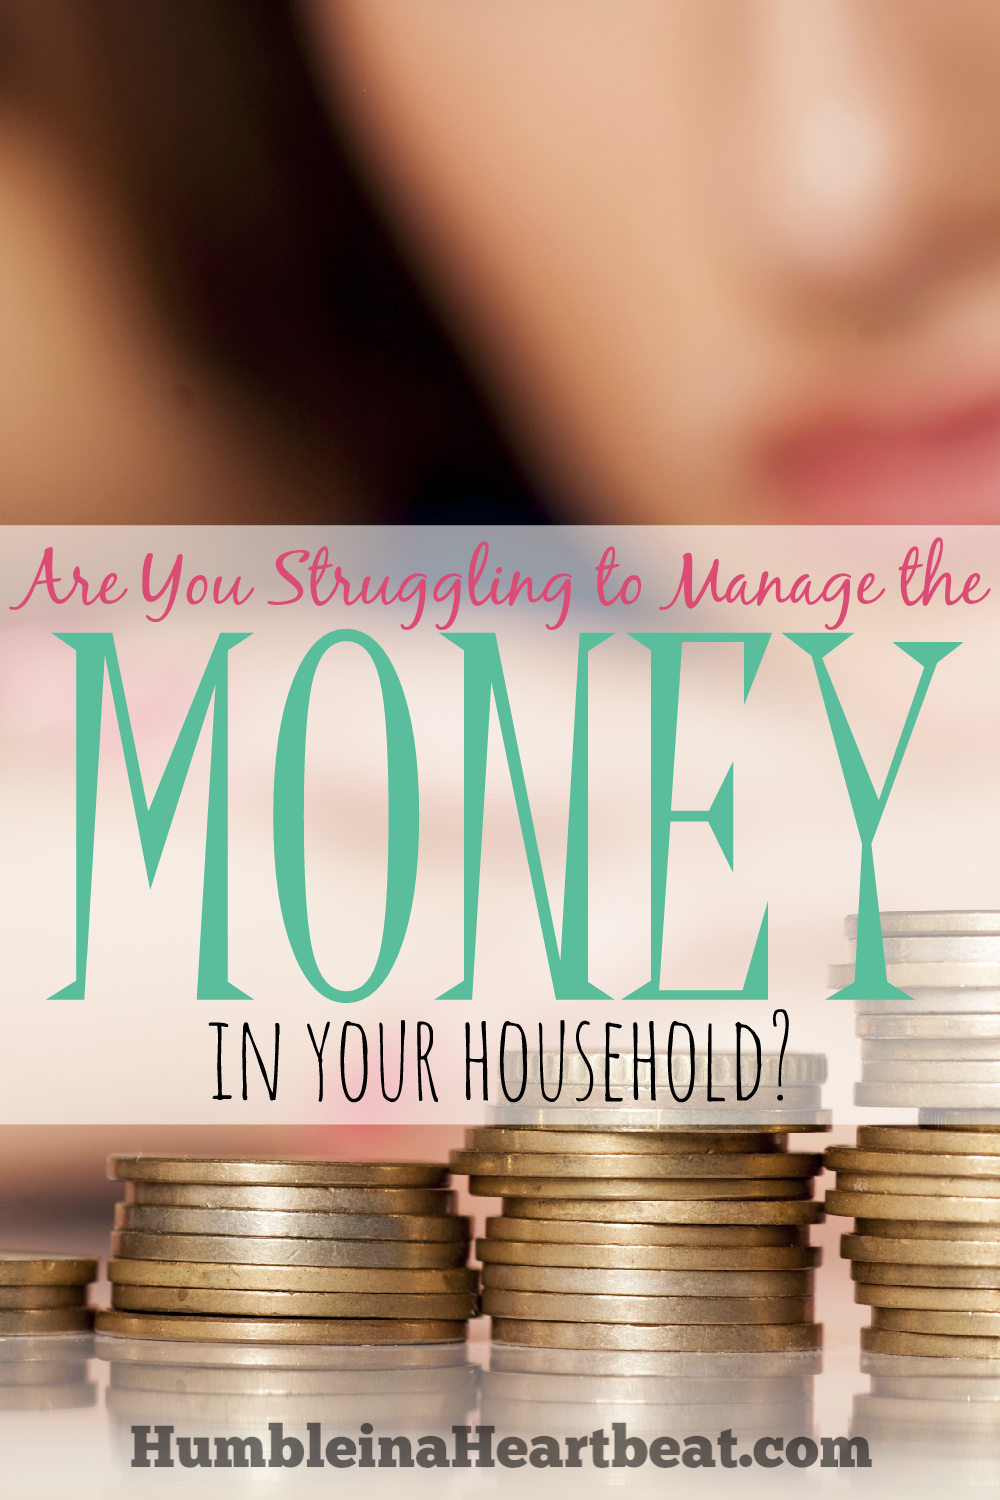 Taking care of the finances for your family is a tough job when there are so many other things to do. These are my struggles. Maybe you can relate.